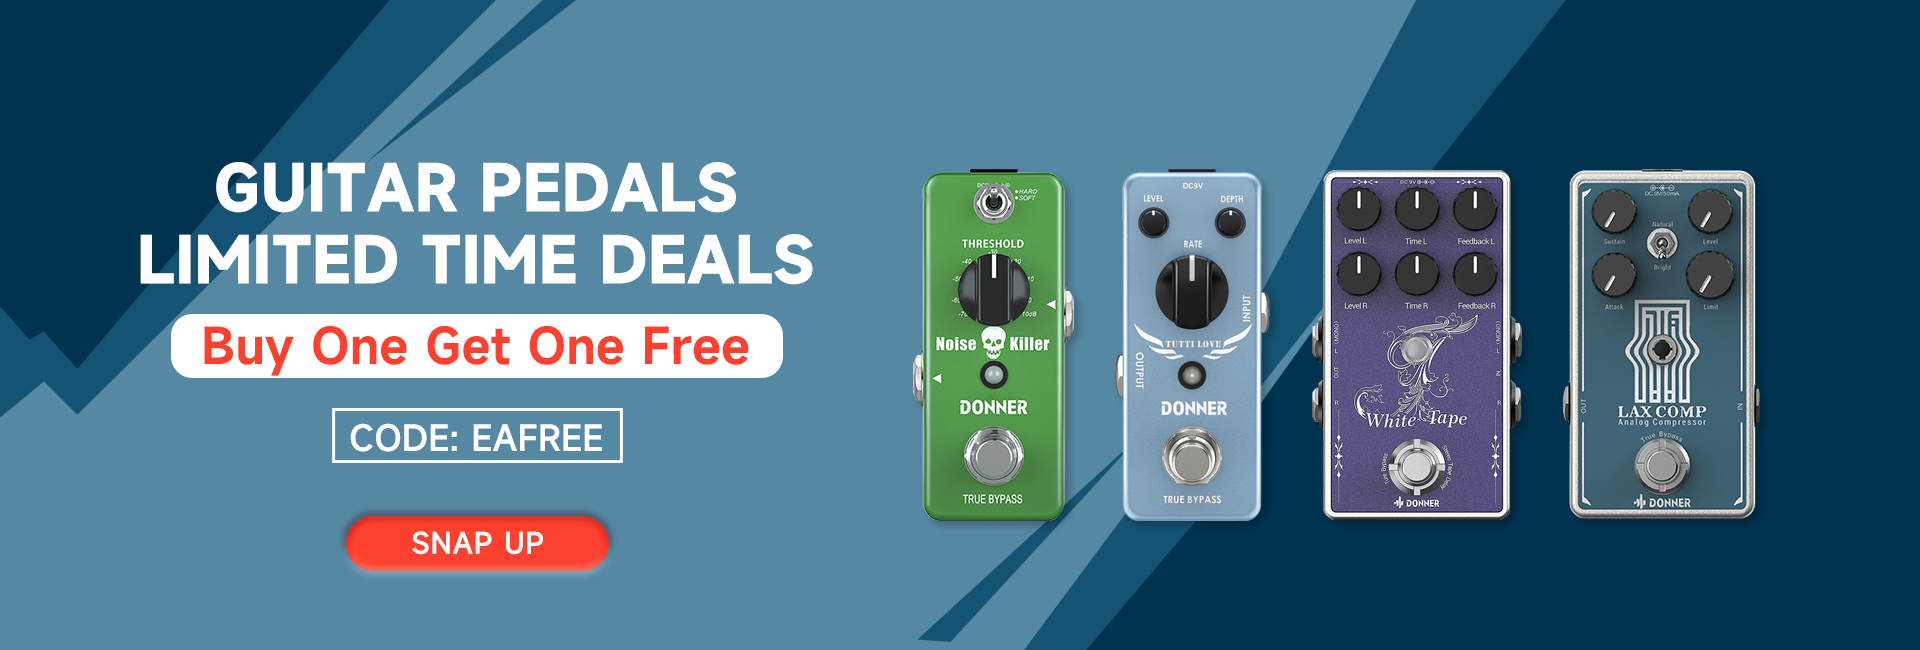 donner-pedal-buy-1-get-1-free